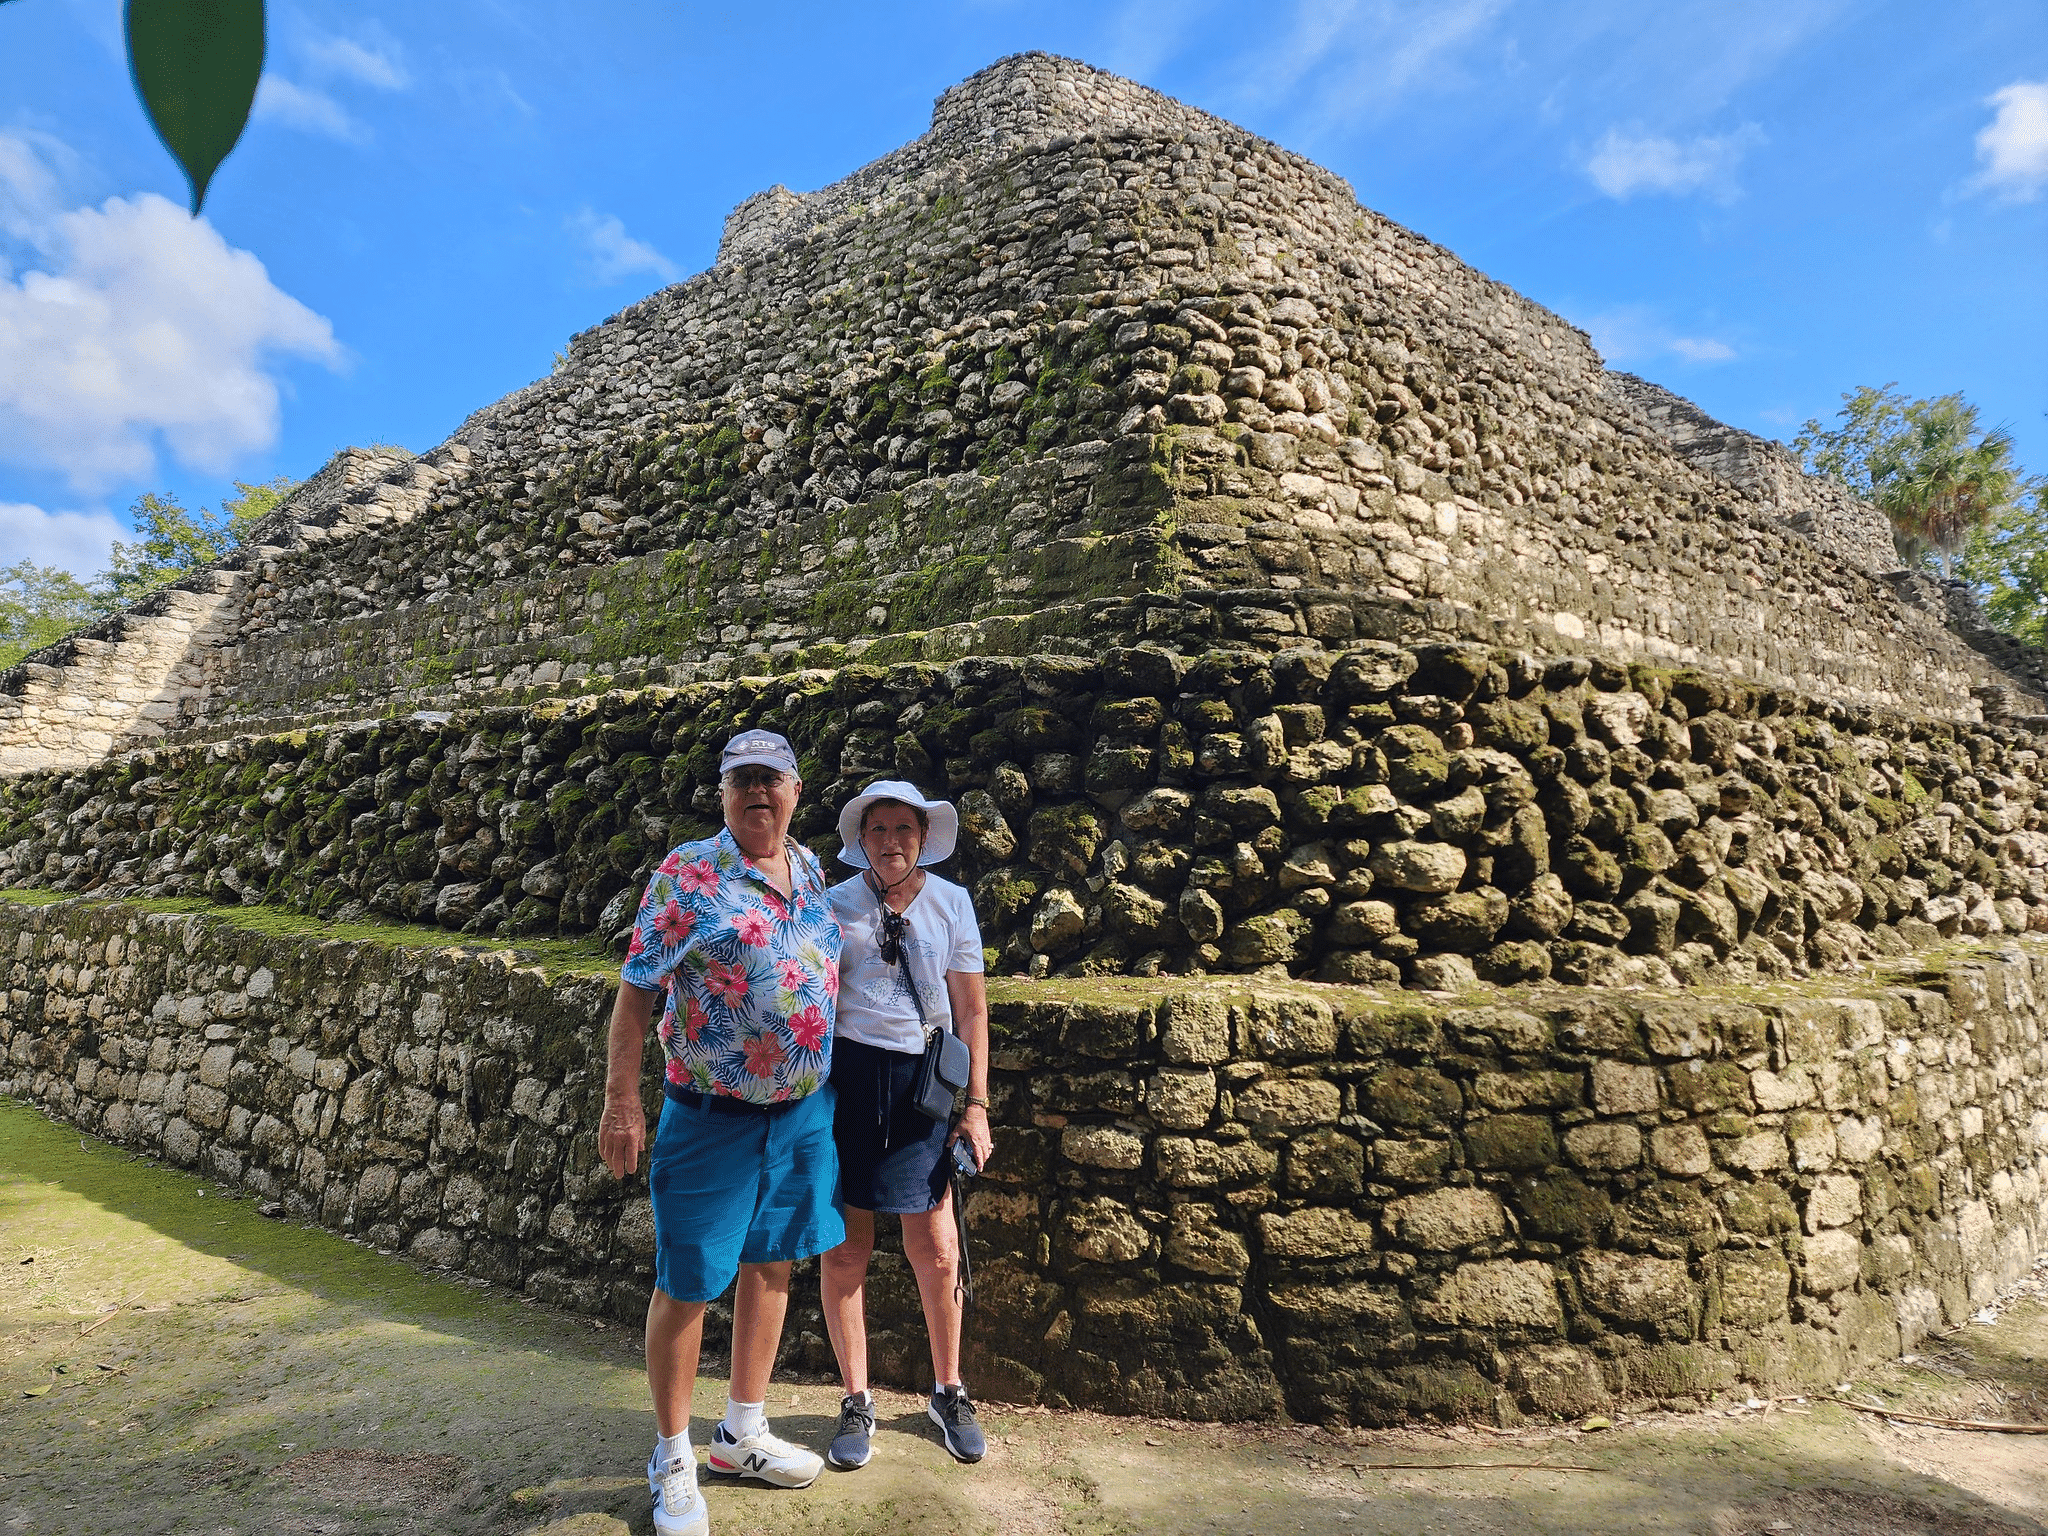 Joan and Joe Griffin at the foot of some majestic Mayan ruins.